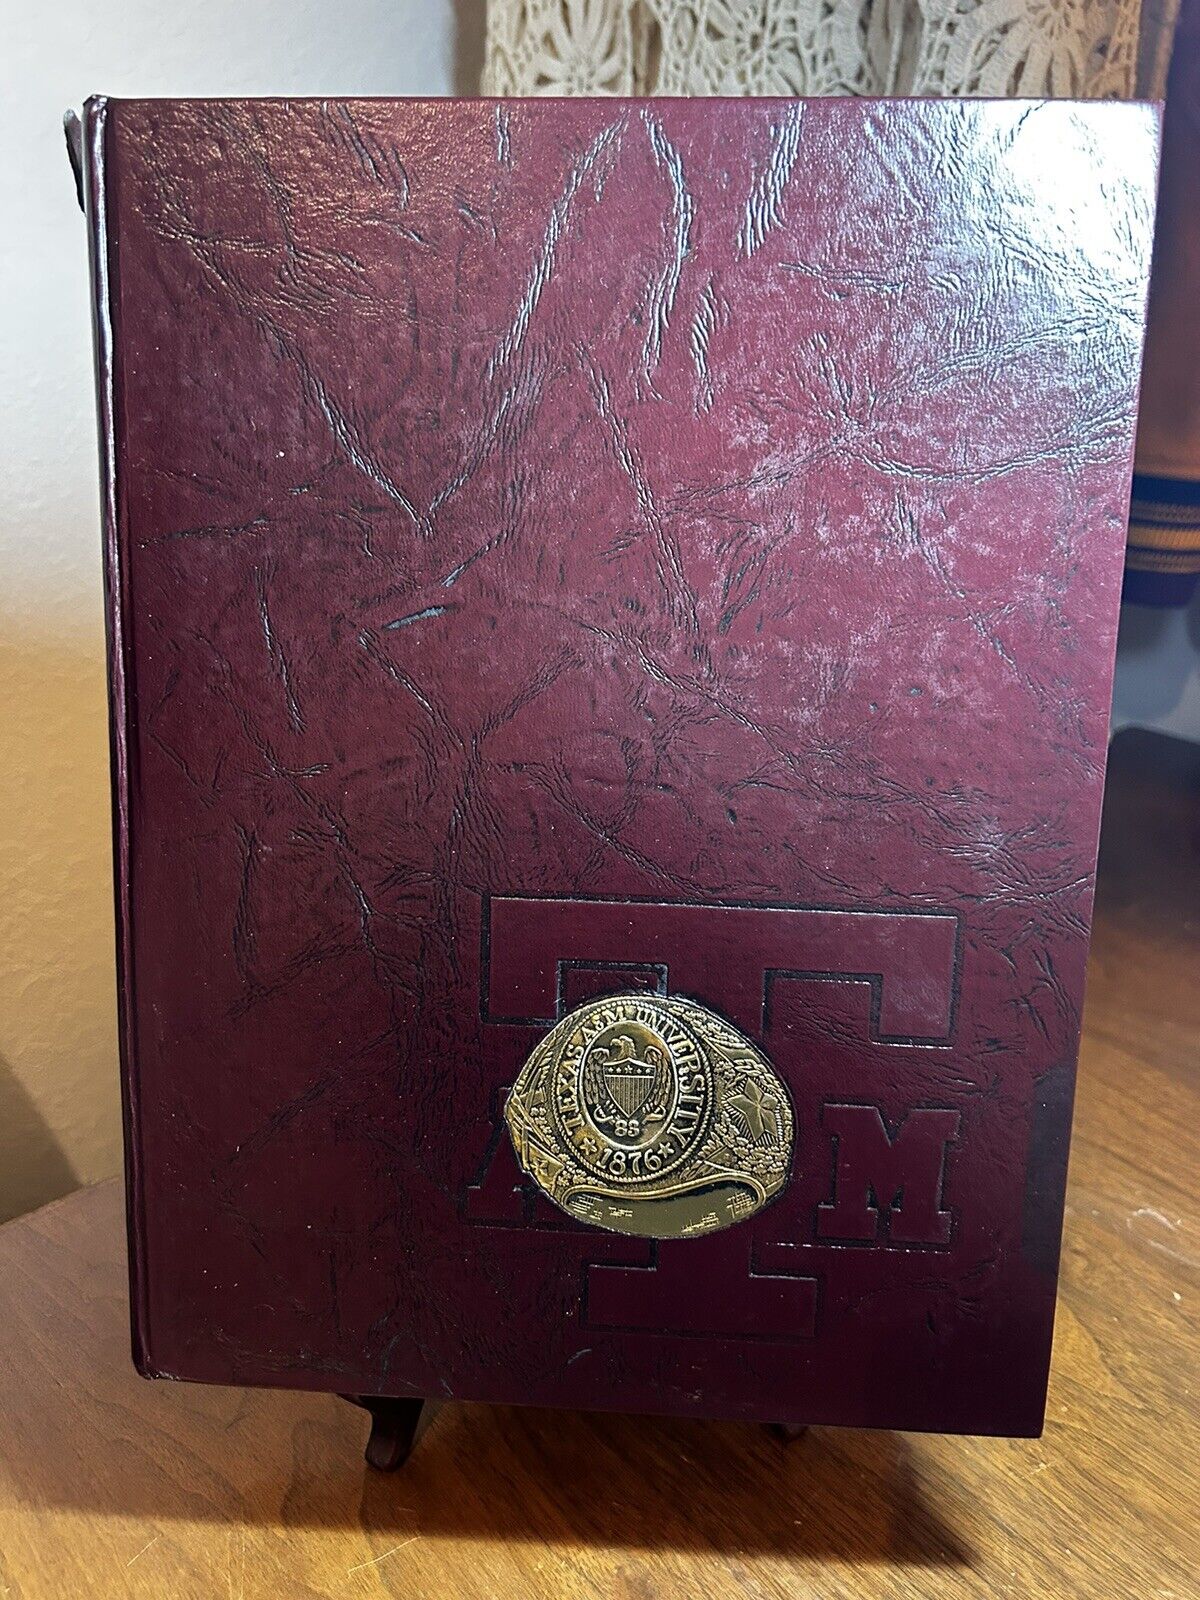 Vintage Aggieland Aggies 1983 Texas A&M College Yearbook, Volume 81 w 848 pages